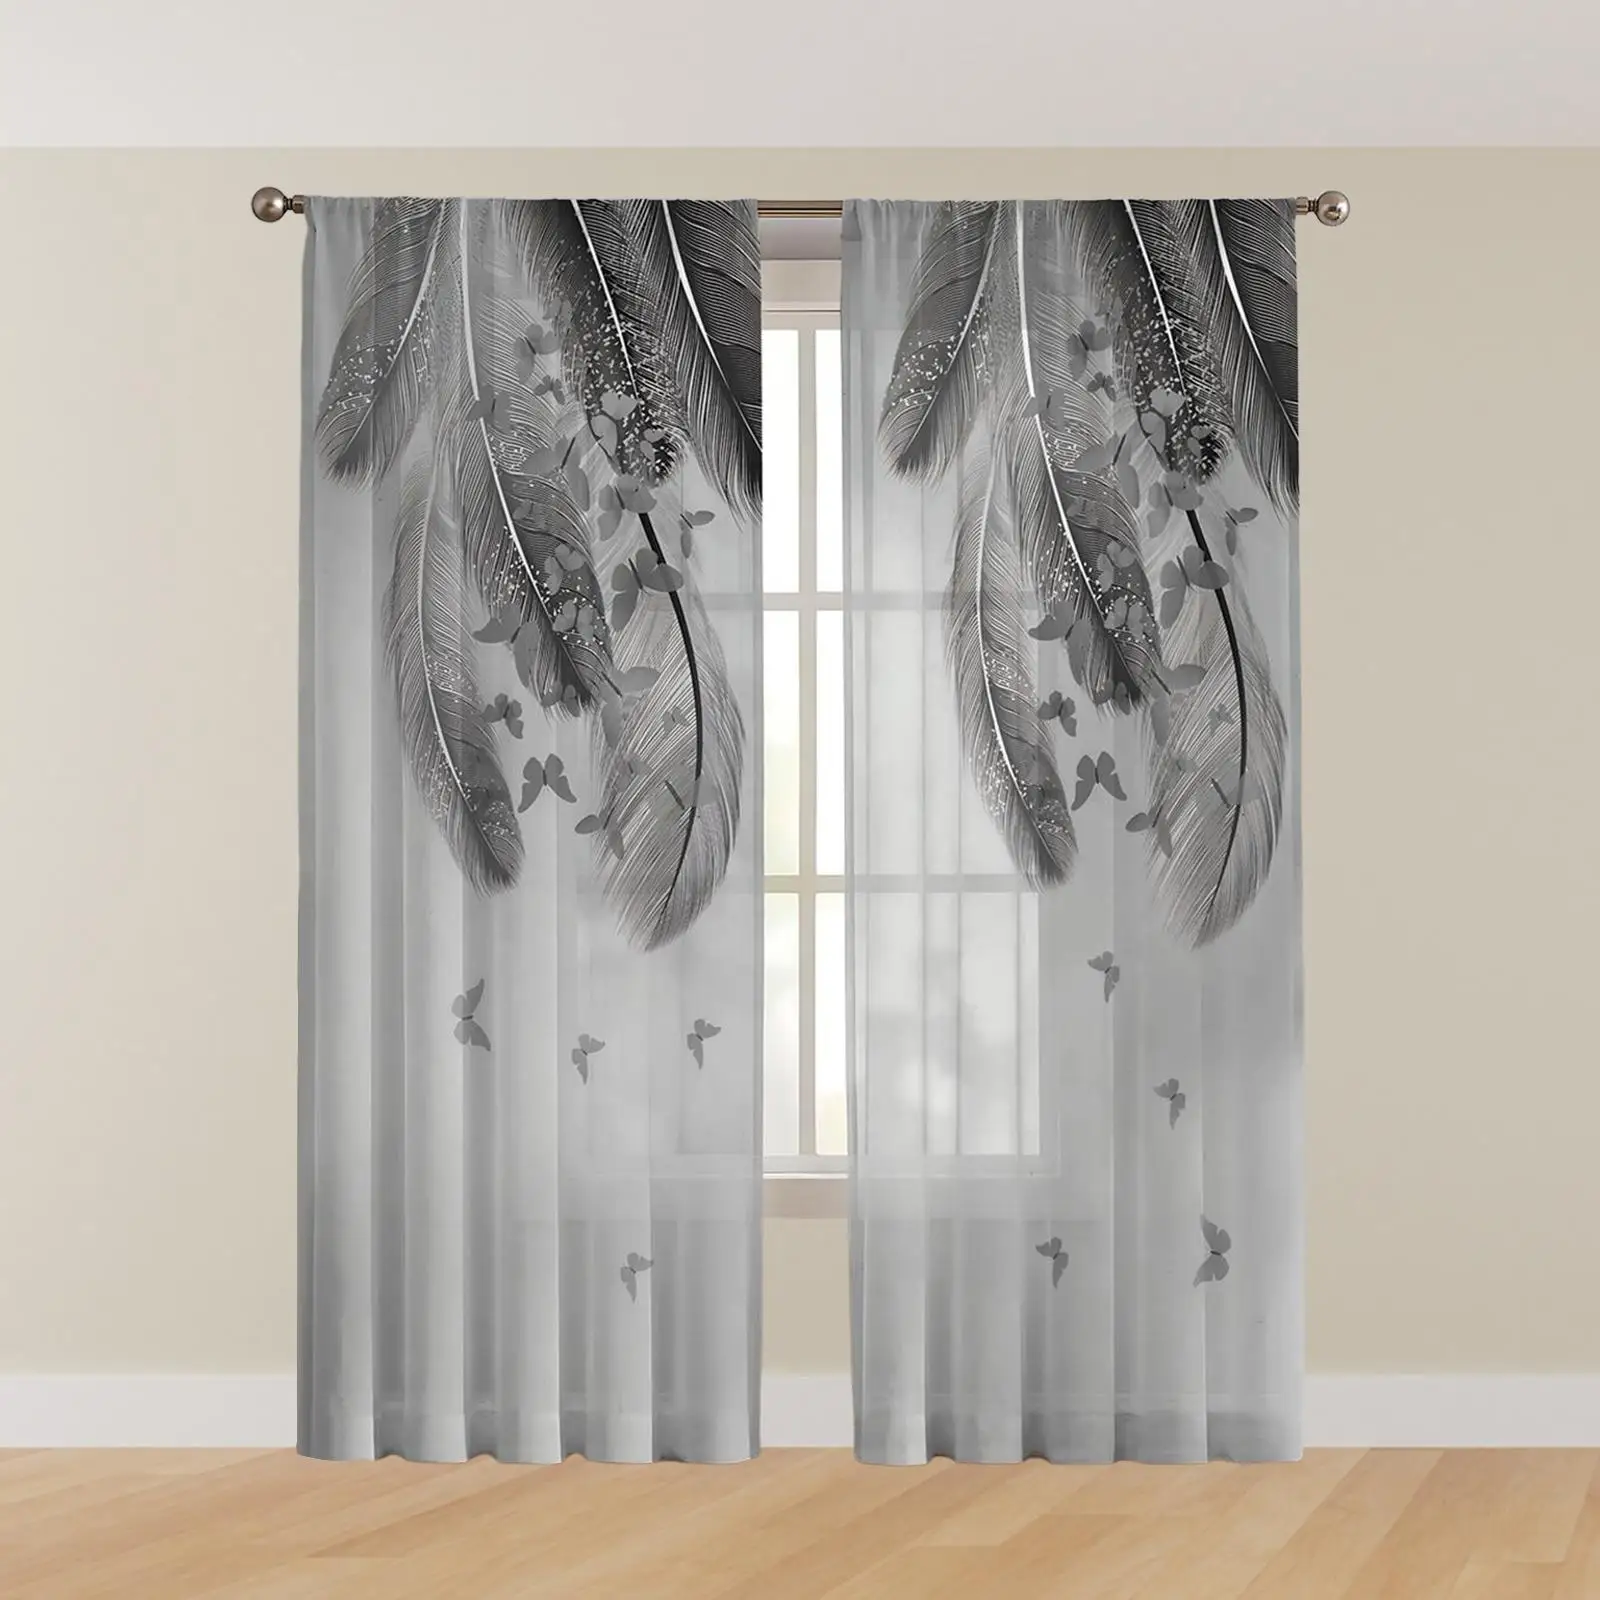 Semi Sheer Voile Window Curtains Decorative Modern Semi Sheer Curtains Window Tulle Curtains for Home Decor Patio Study Office